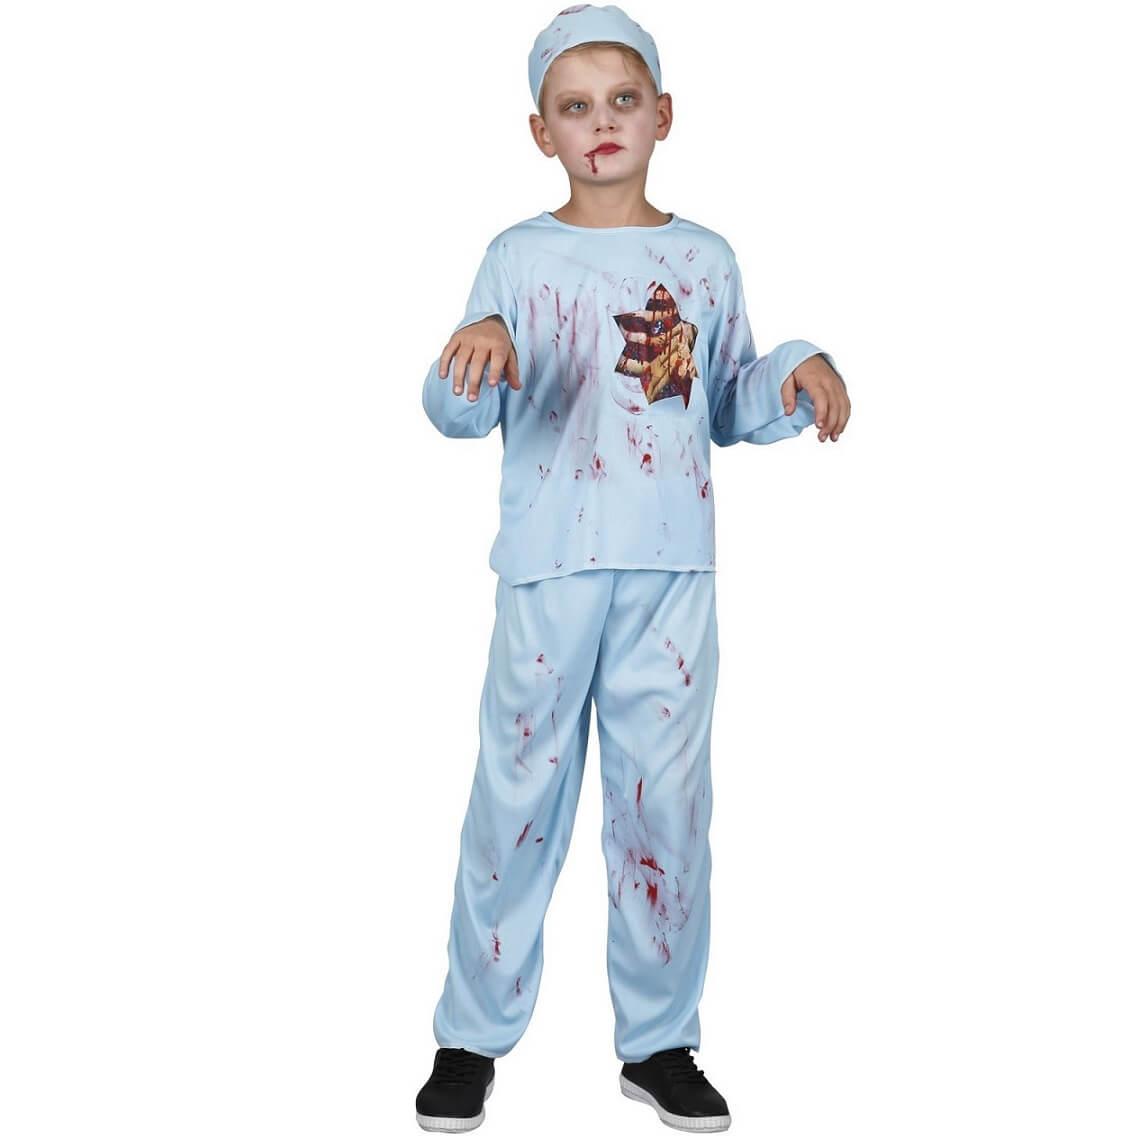 Costume enfant halloween chirurgien sanglant taille 7 a 9 ans